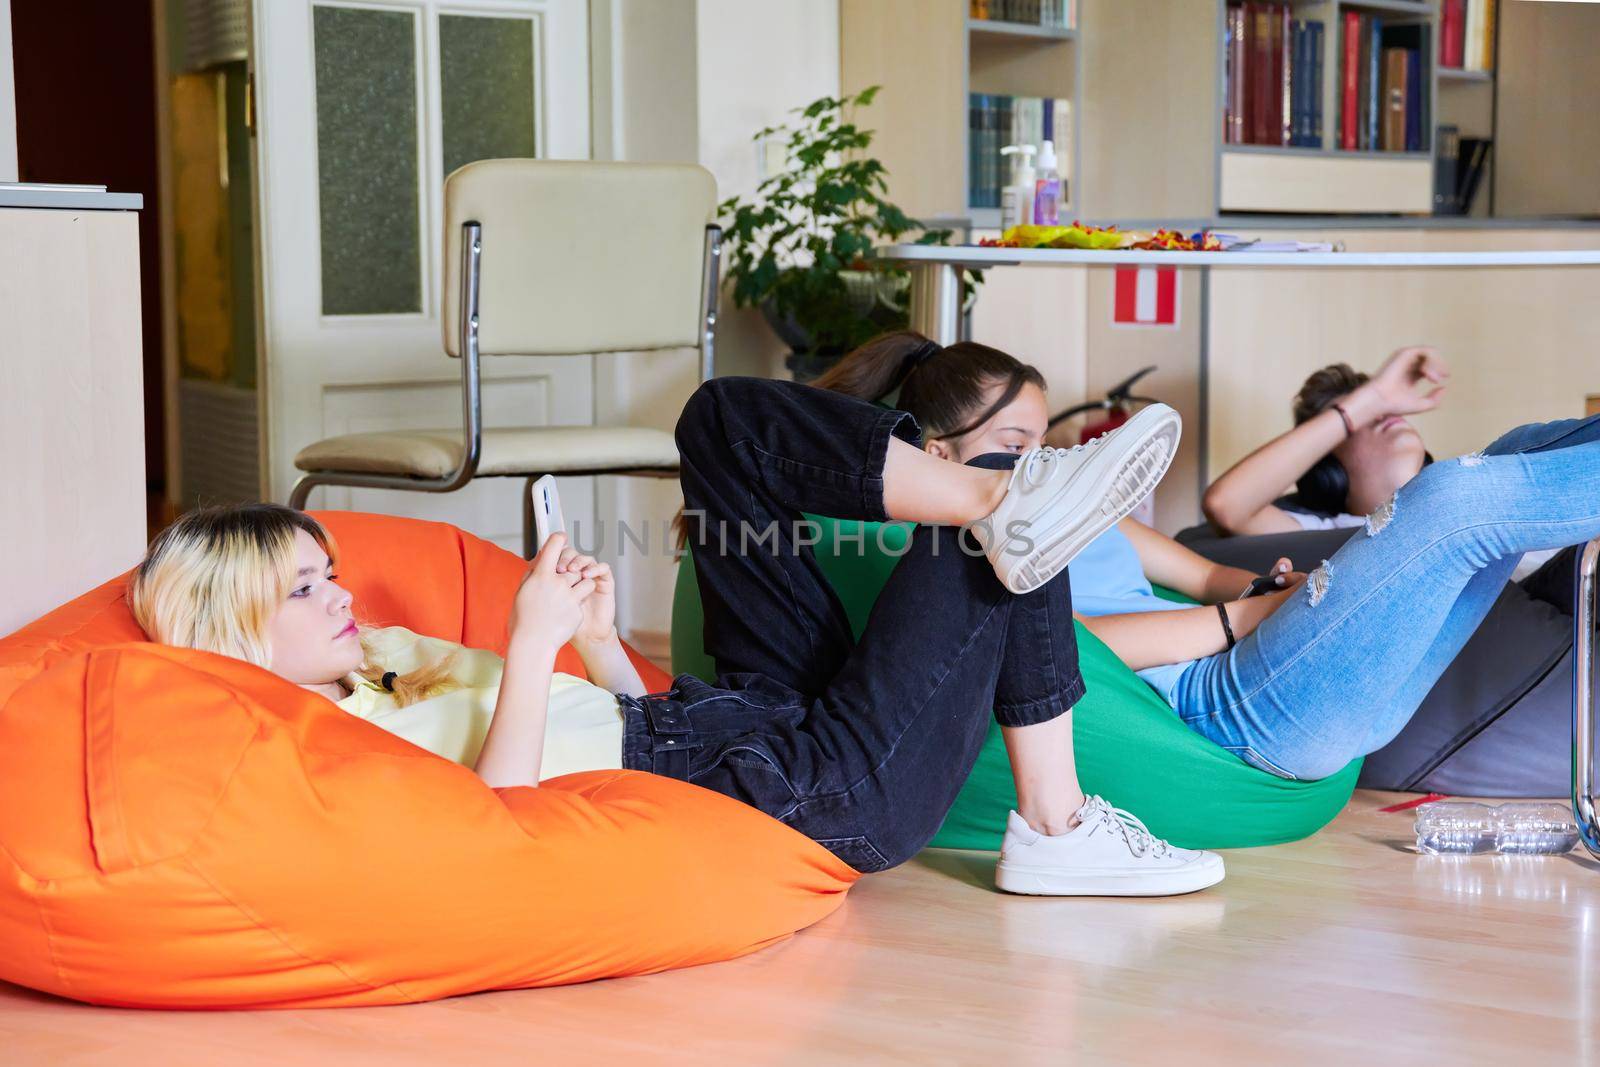 Teenage students resting in the classroom on bean bags on the floor. Adolescence, high school, leisure concept